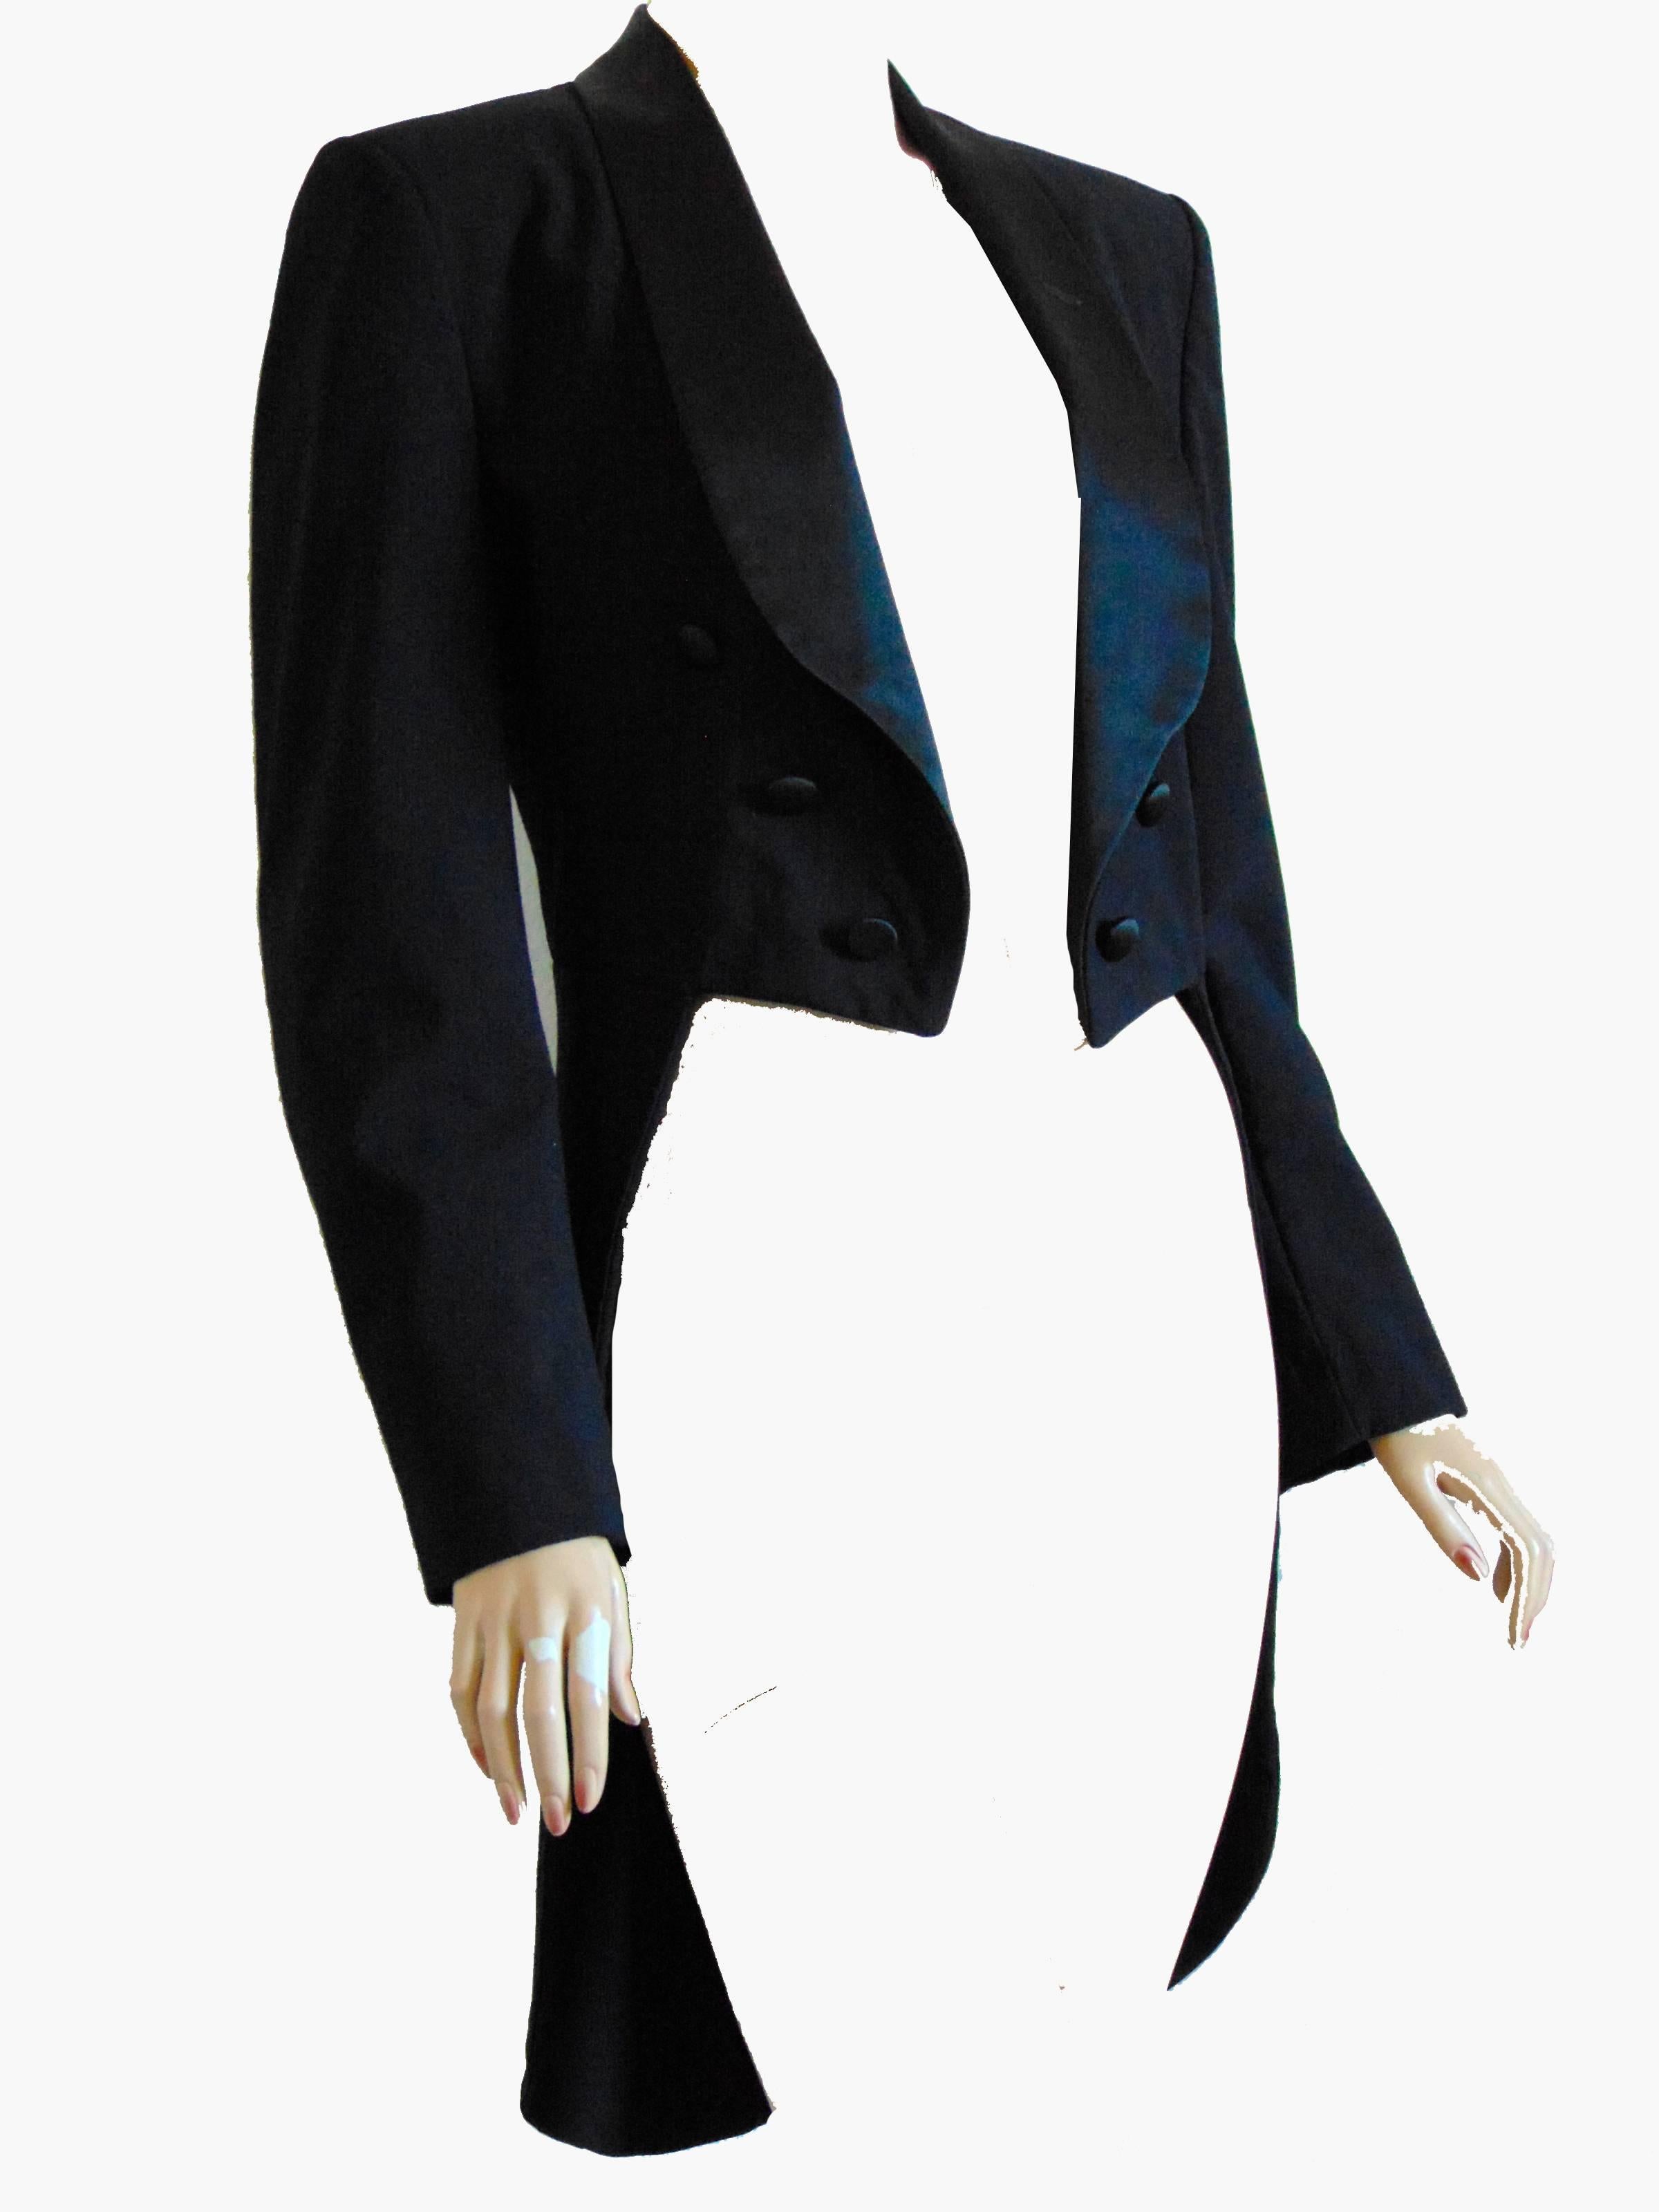 womens tuxedo jacket with tails